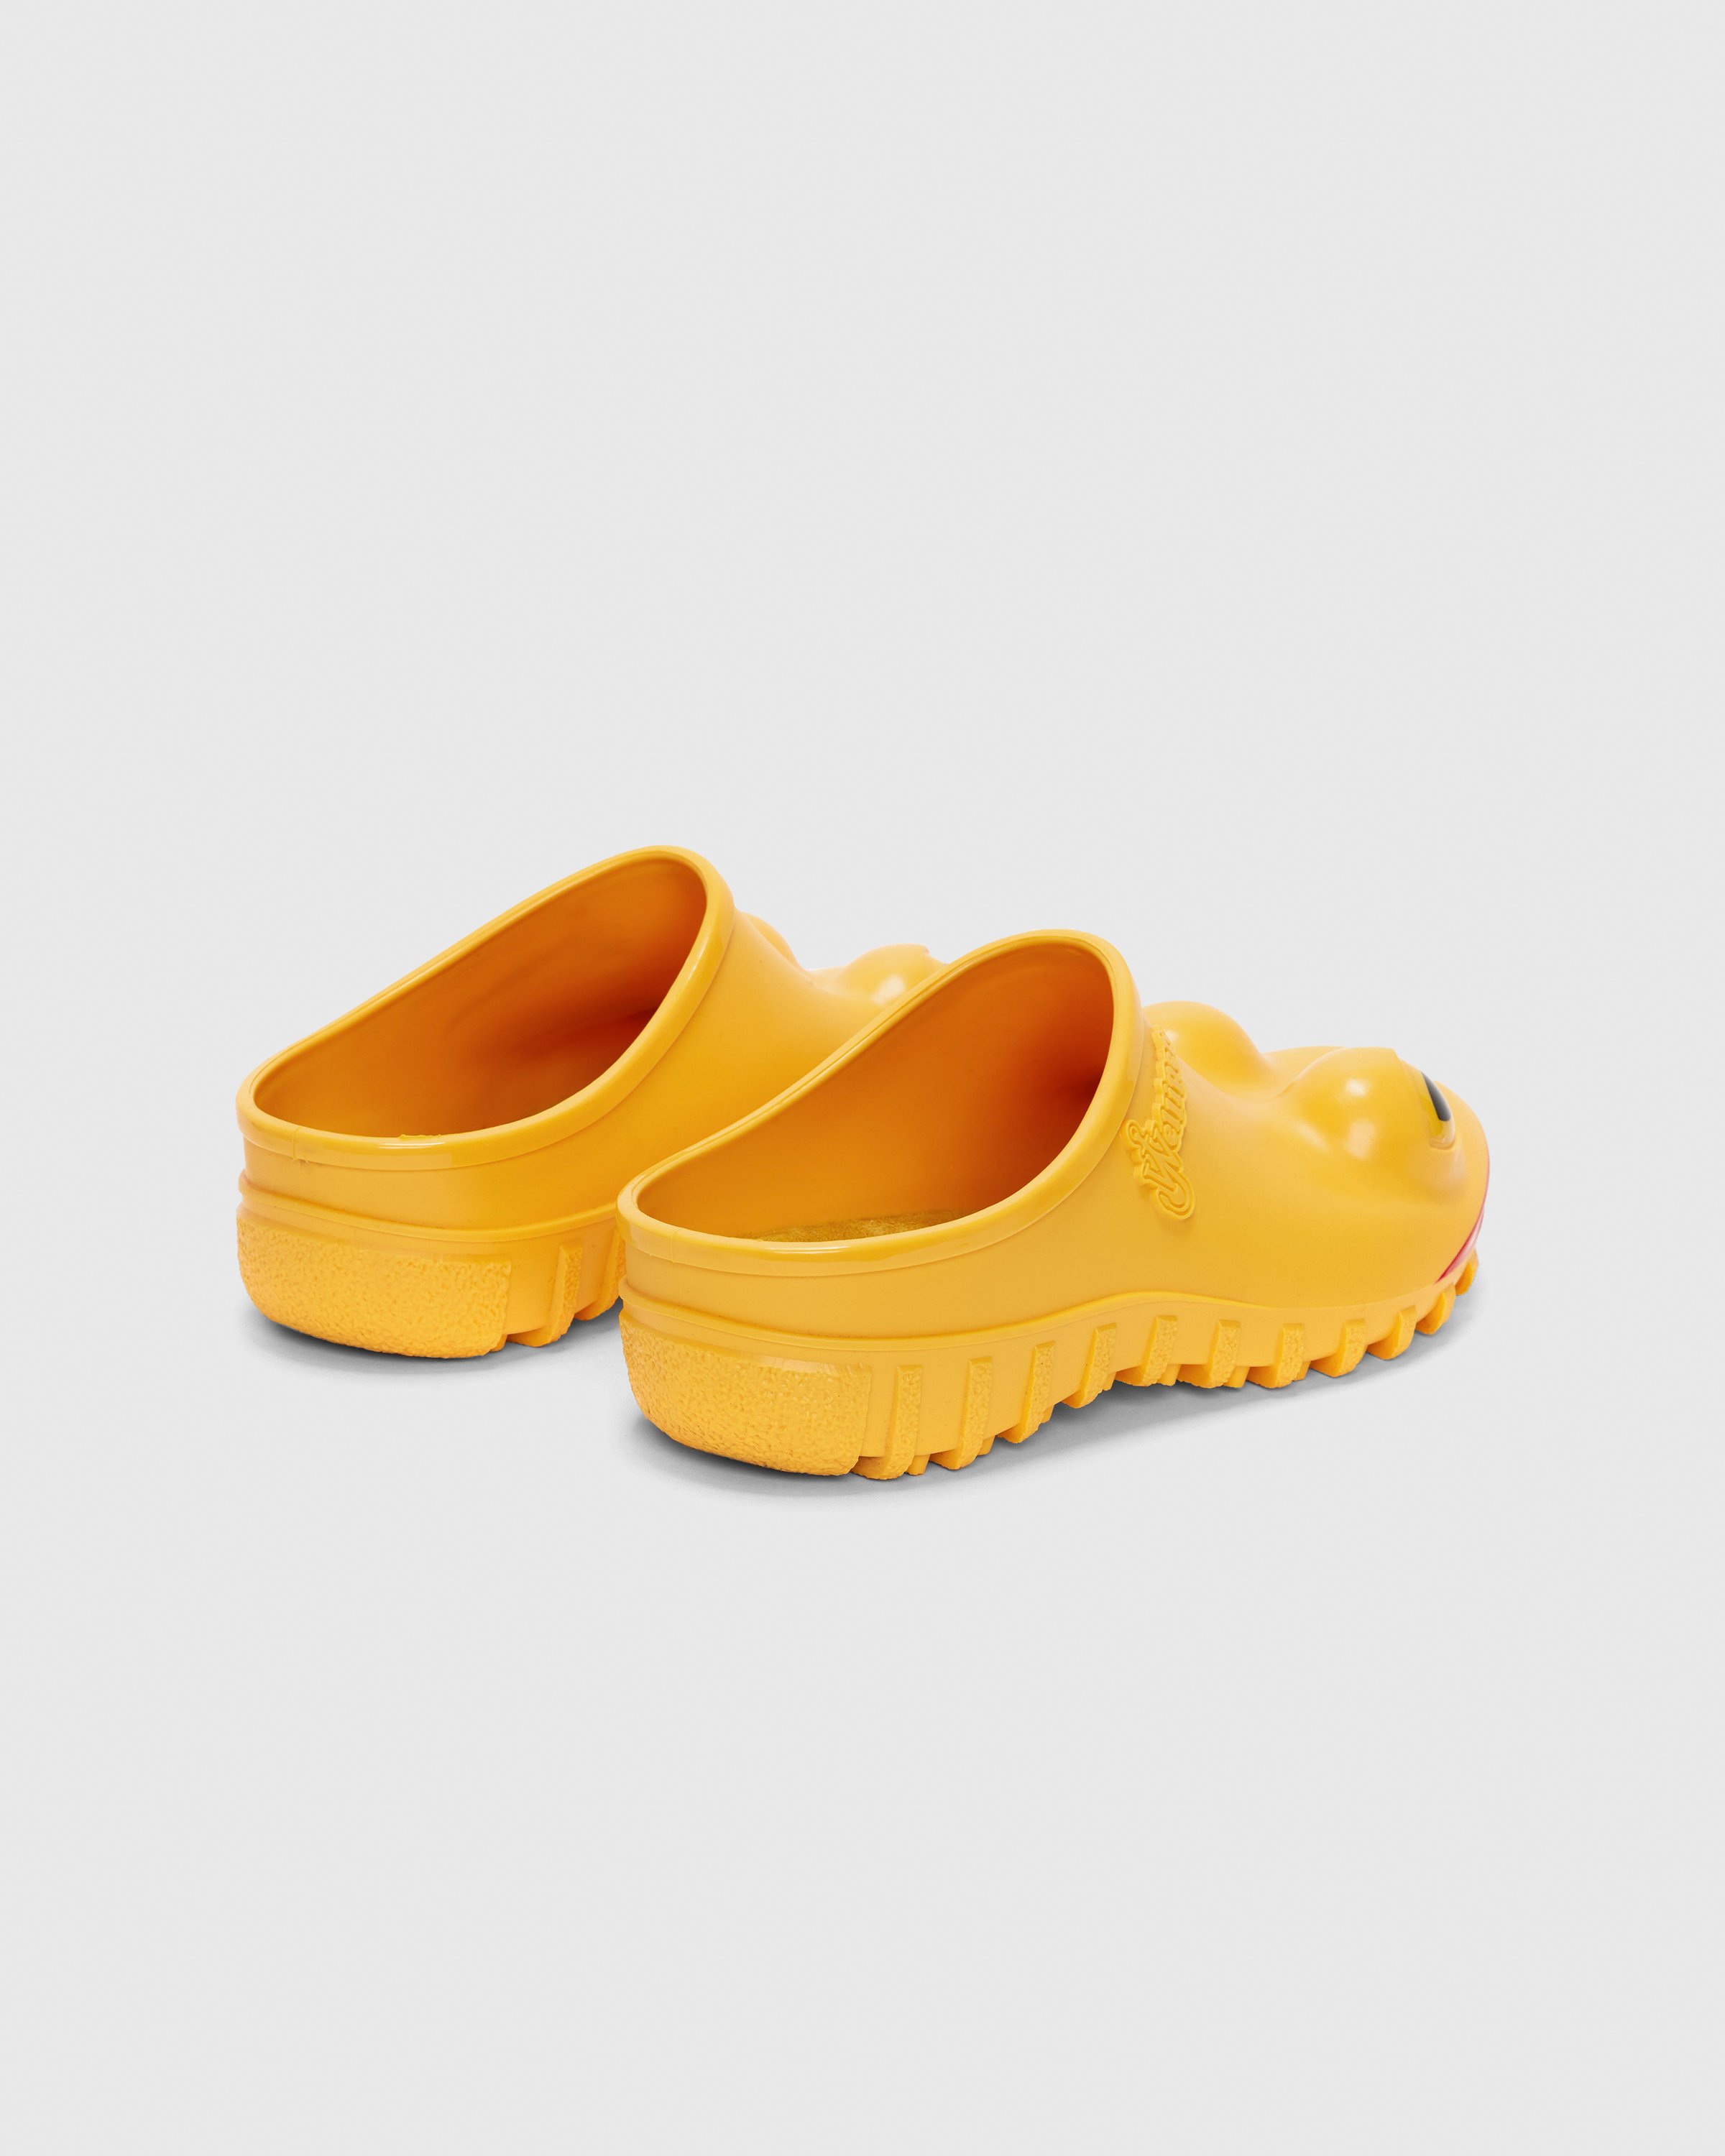 J.W. Anderson x Wellipets - Frog Loafer Yellow - Footwear - Yellow - Image 3